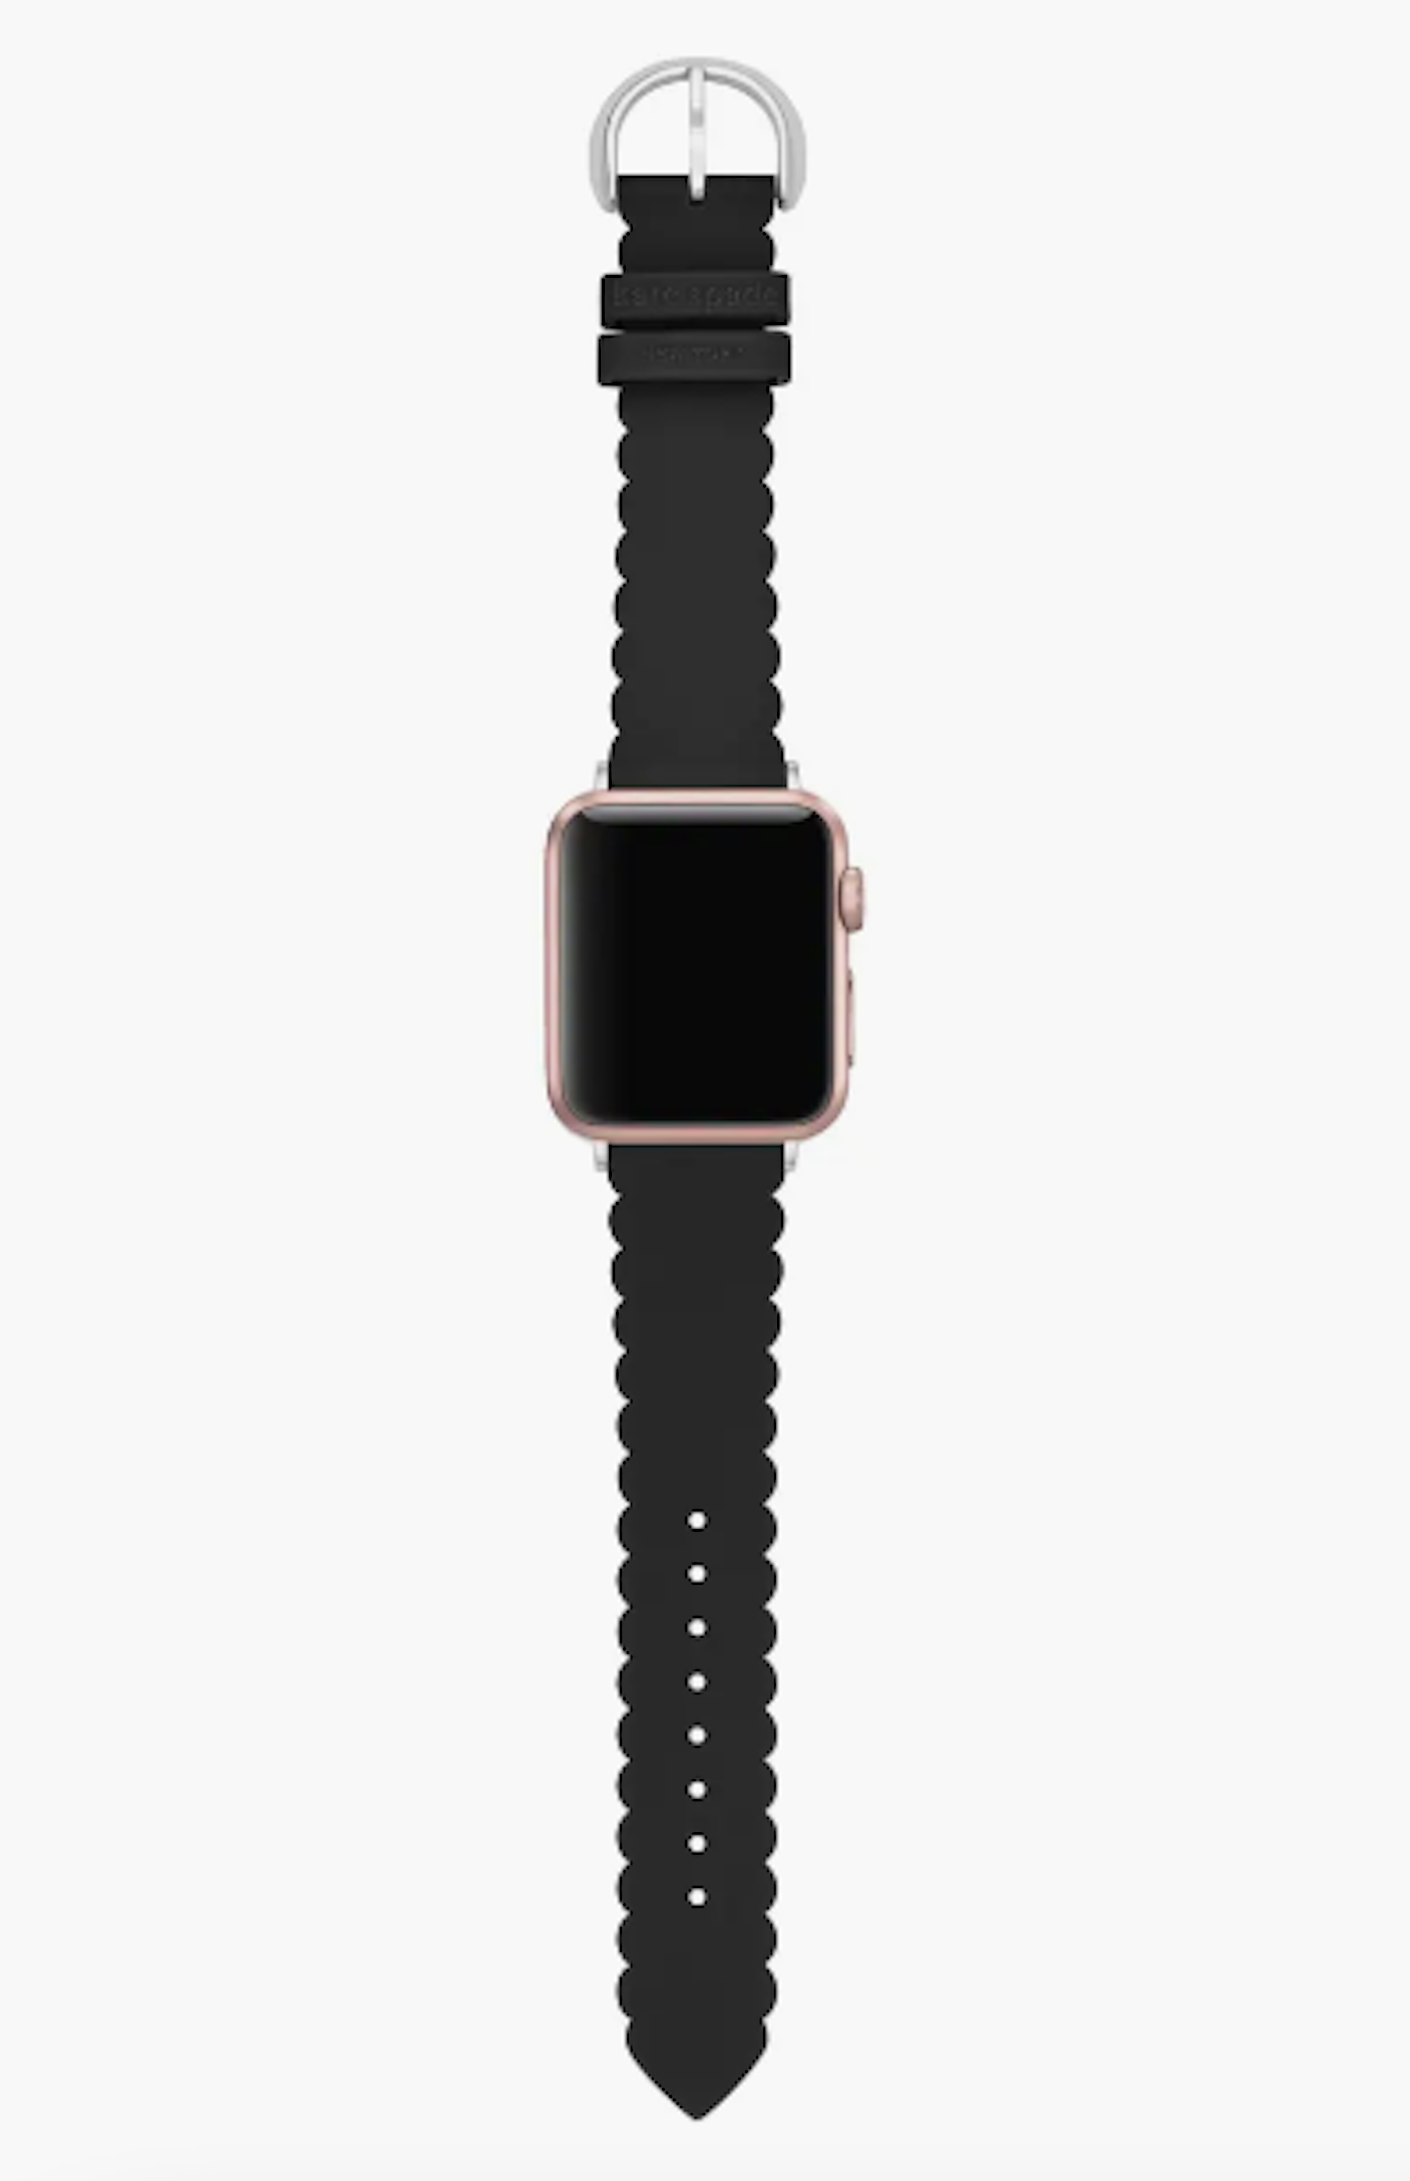 a black silicone watch band.